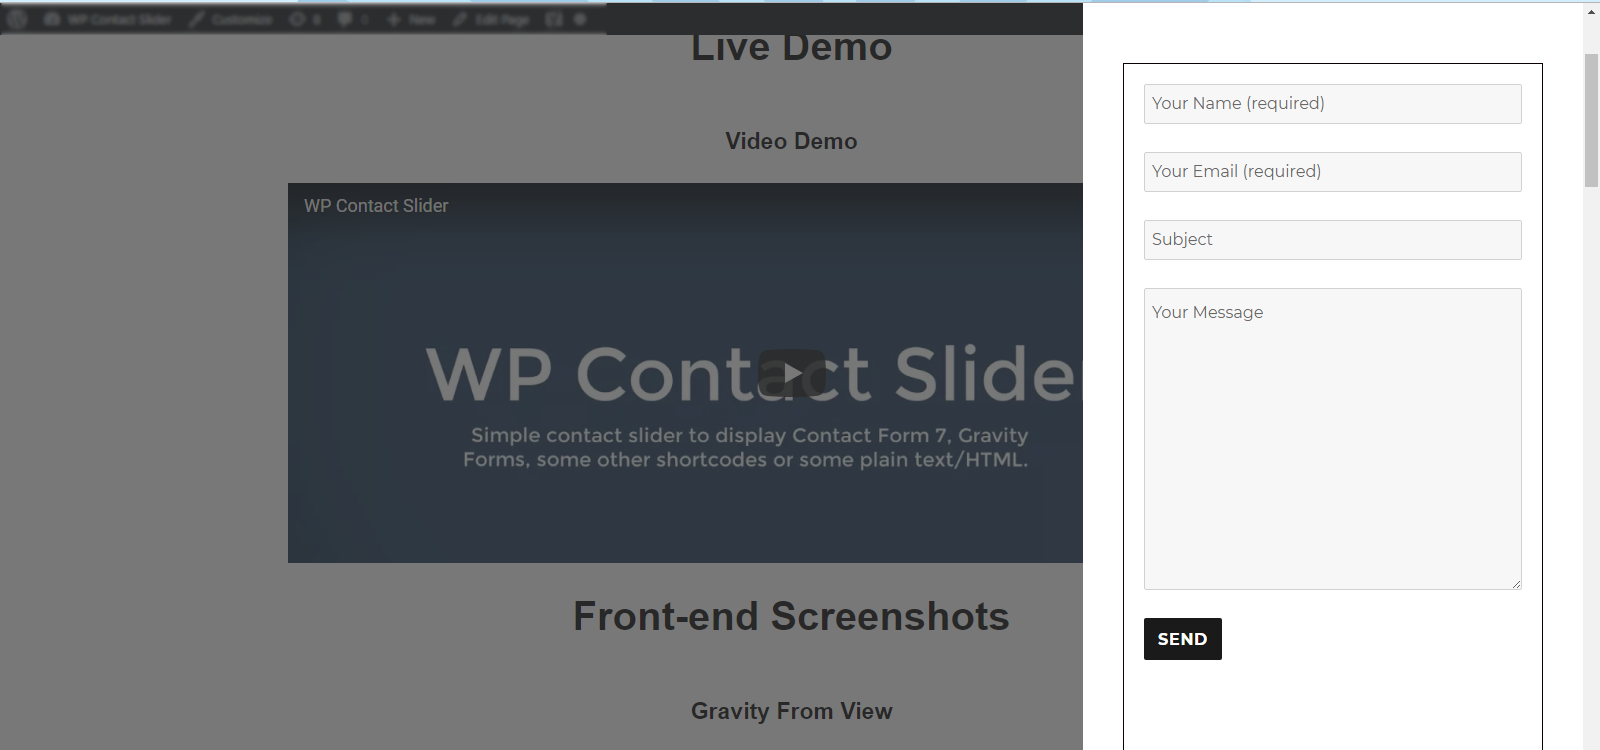 Example of WP Contact Slider with Contact Form 7.